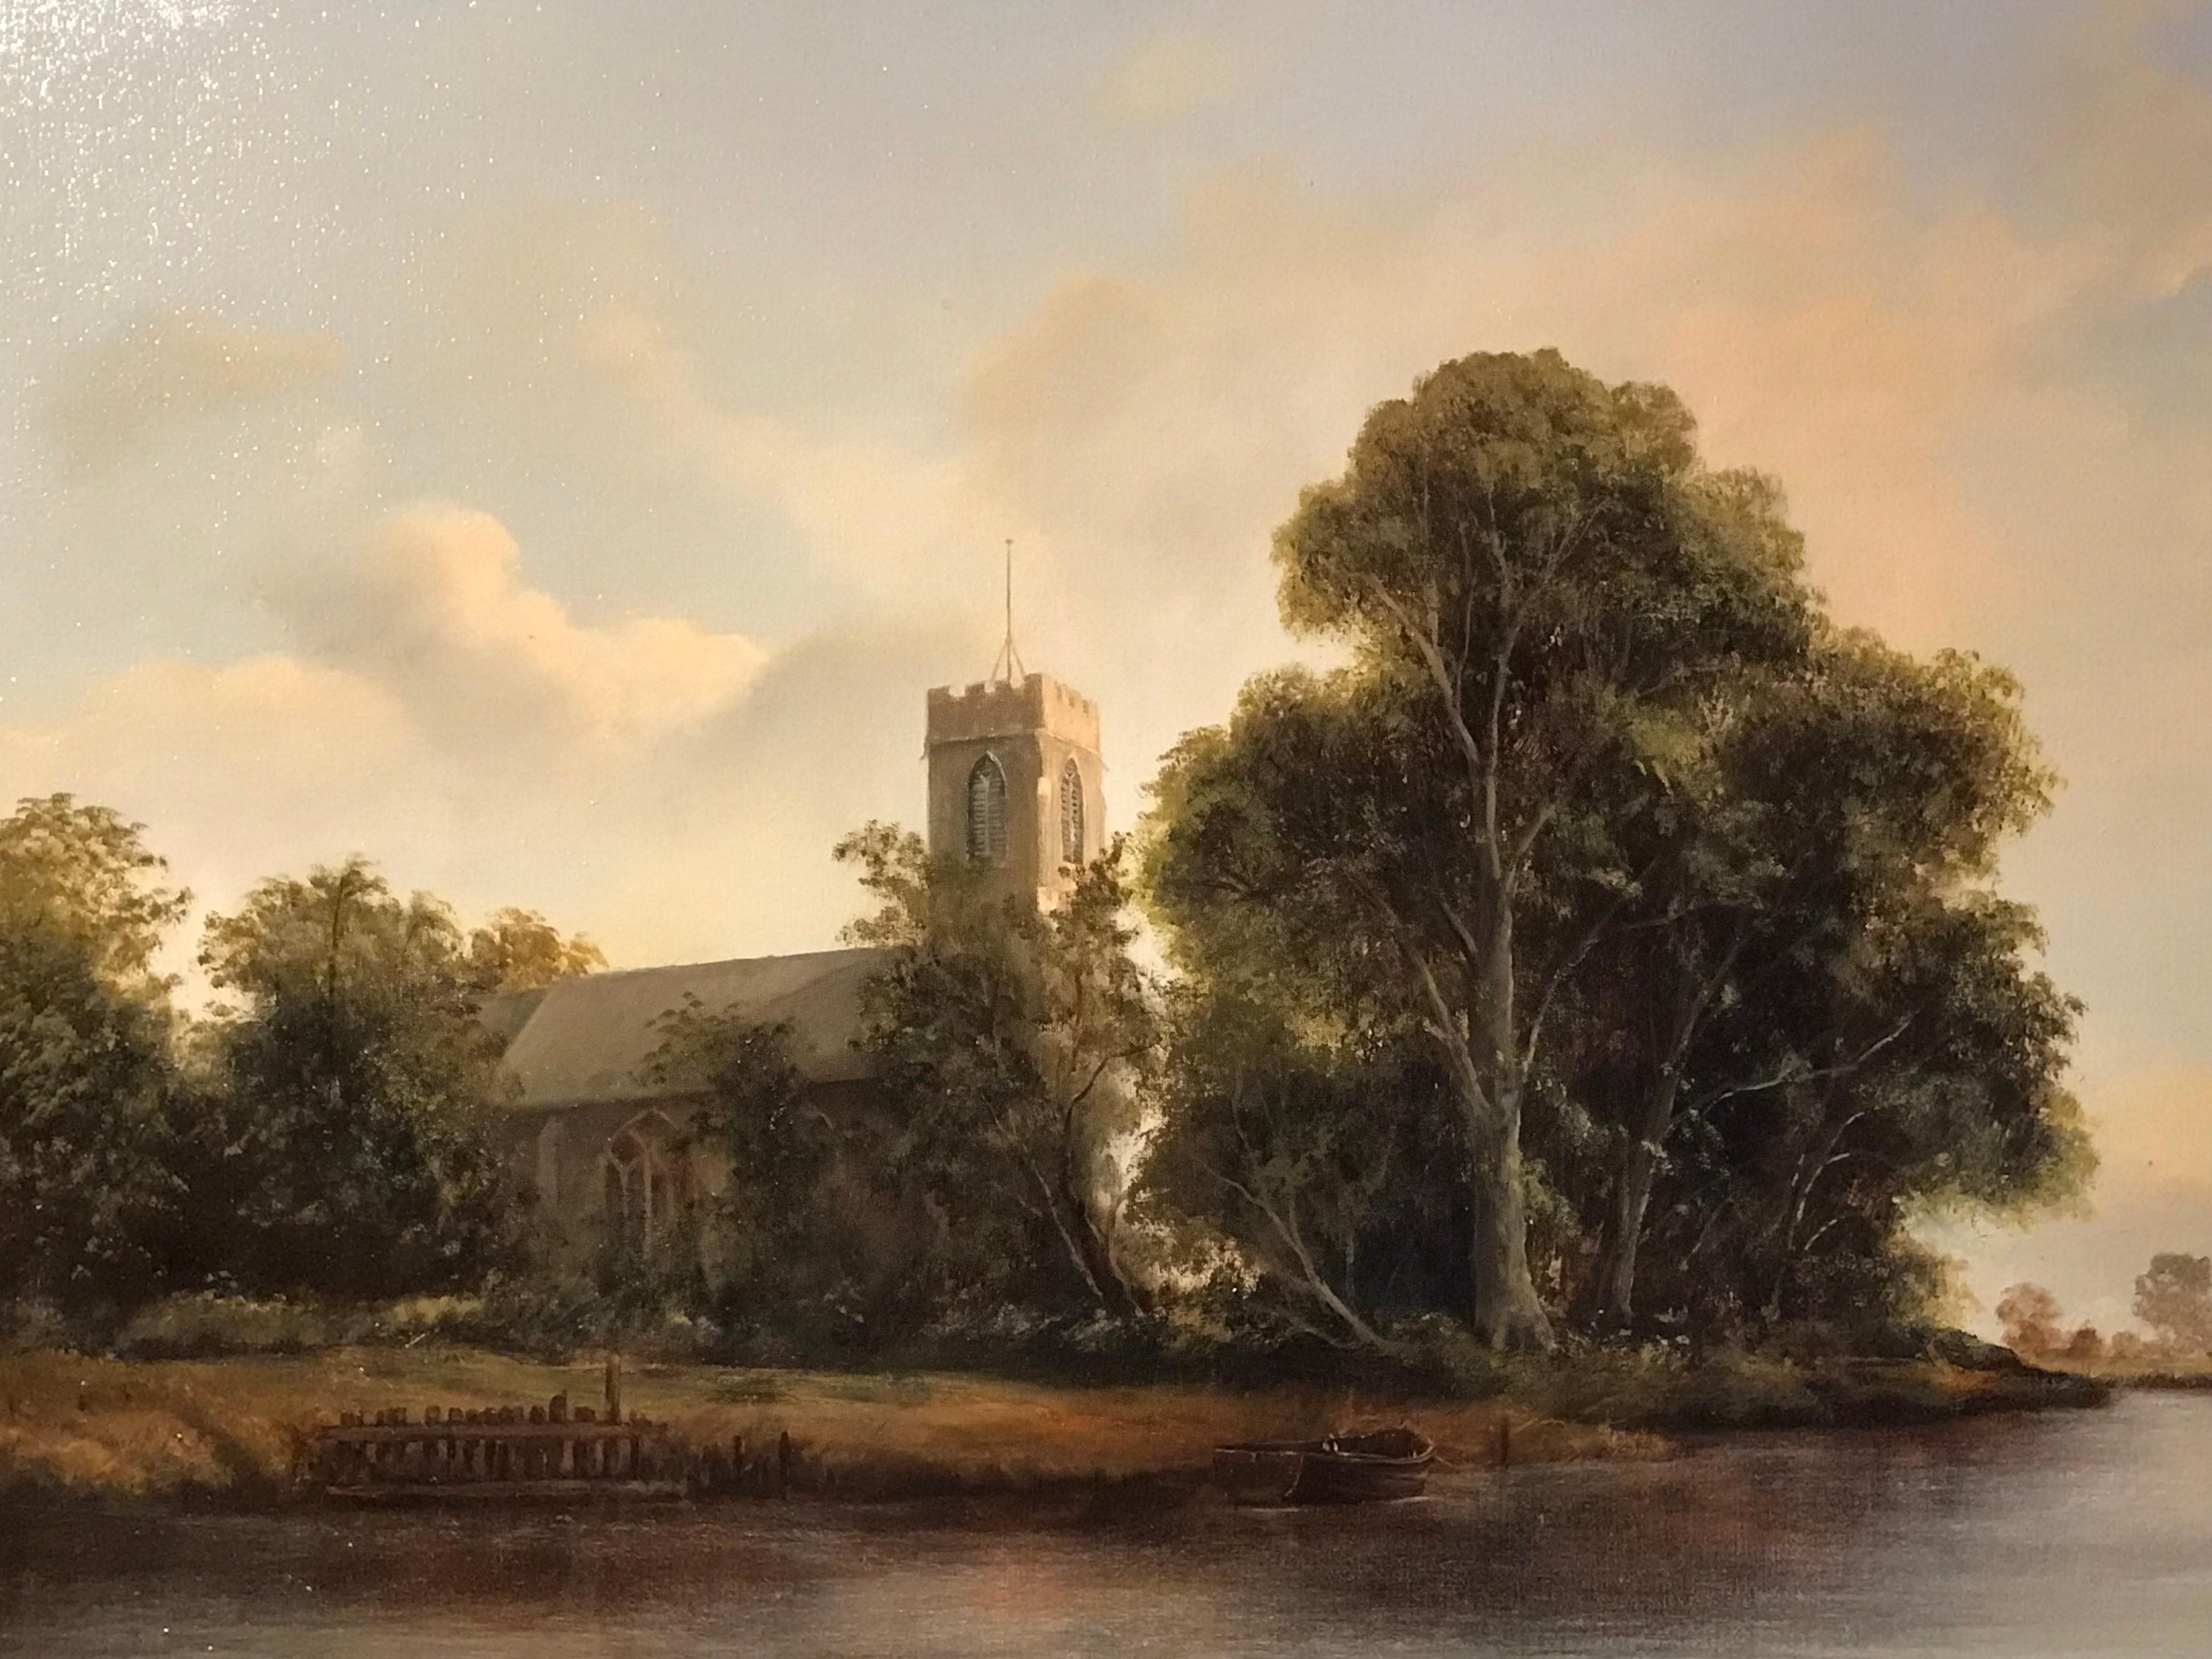 Lammas Church
by A. J. Canham, British 20th century
oil painting on canvas, framed
signed & titled
canvas: 24 x 36 inches
framed: 29.5 x 41.5 inches

Beautiful English oil painting depicting this fine river landscape in Norfolk. The location is